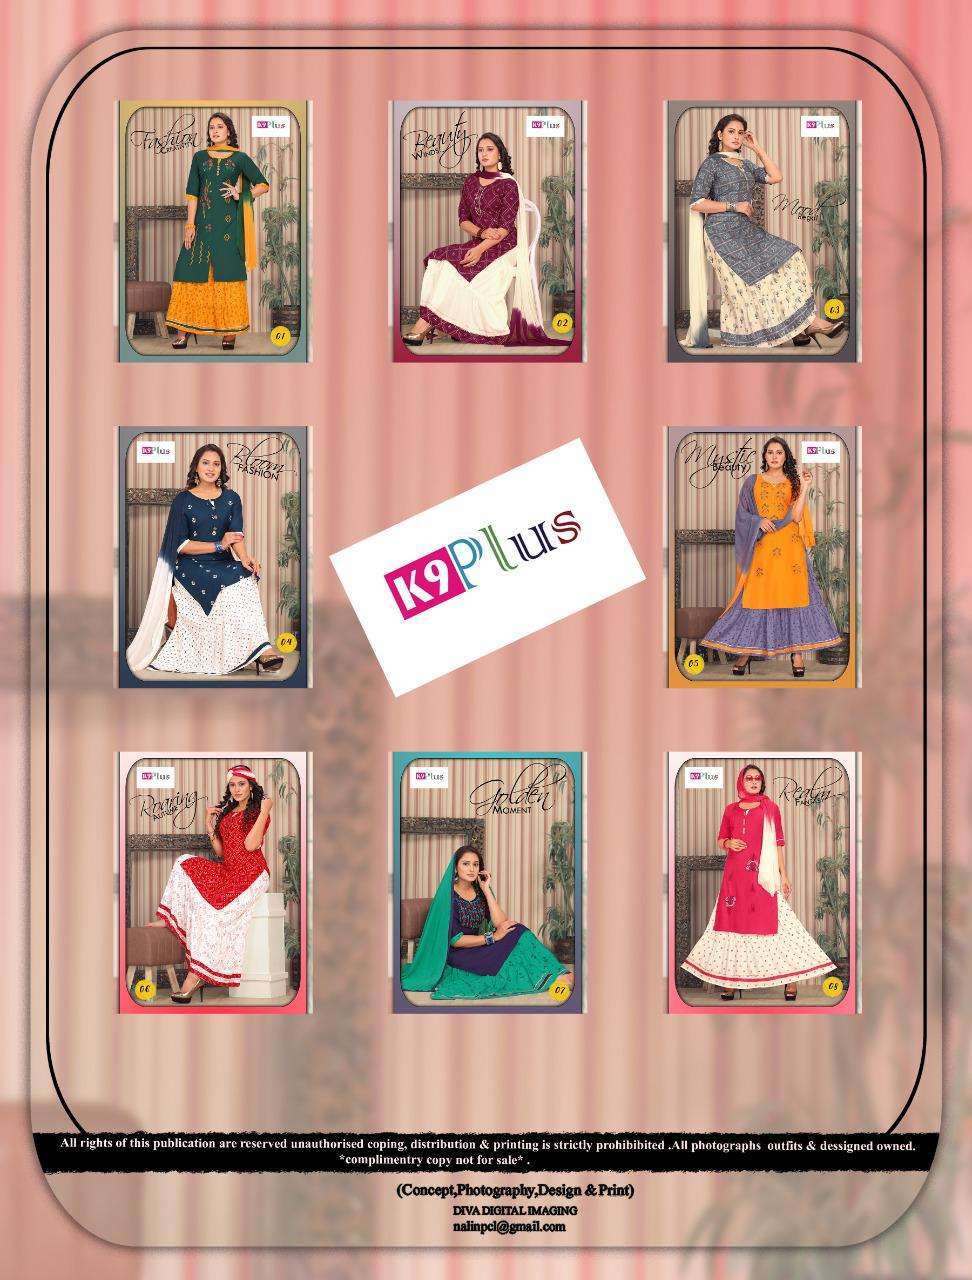 SAMAIRA BY K9 PLUS 01 TO 08 SERIES BEAUTIFUL STYLISH SHARARA SUITS FANCY COLORFUL CASUAL WEAR & ETHNIC WEAR & READY TO WEAR RAYON EMBROIDERED DRESSES AT WHOLESALE PRICE